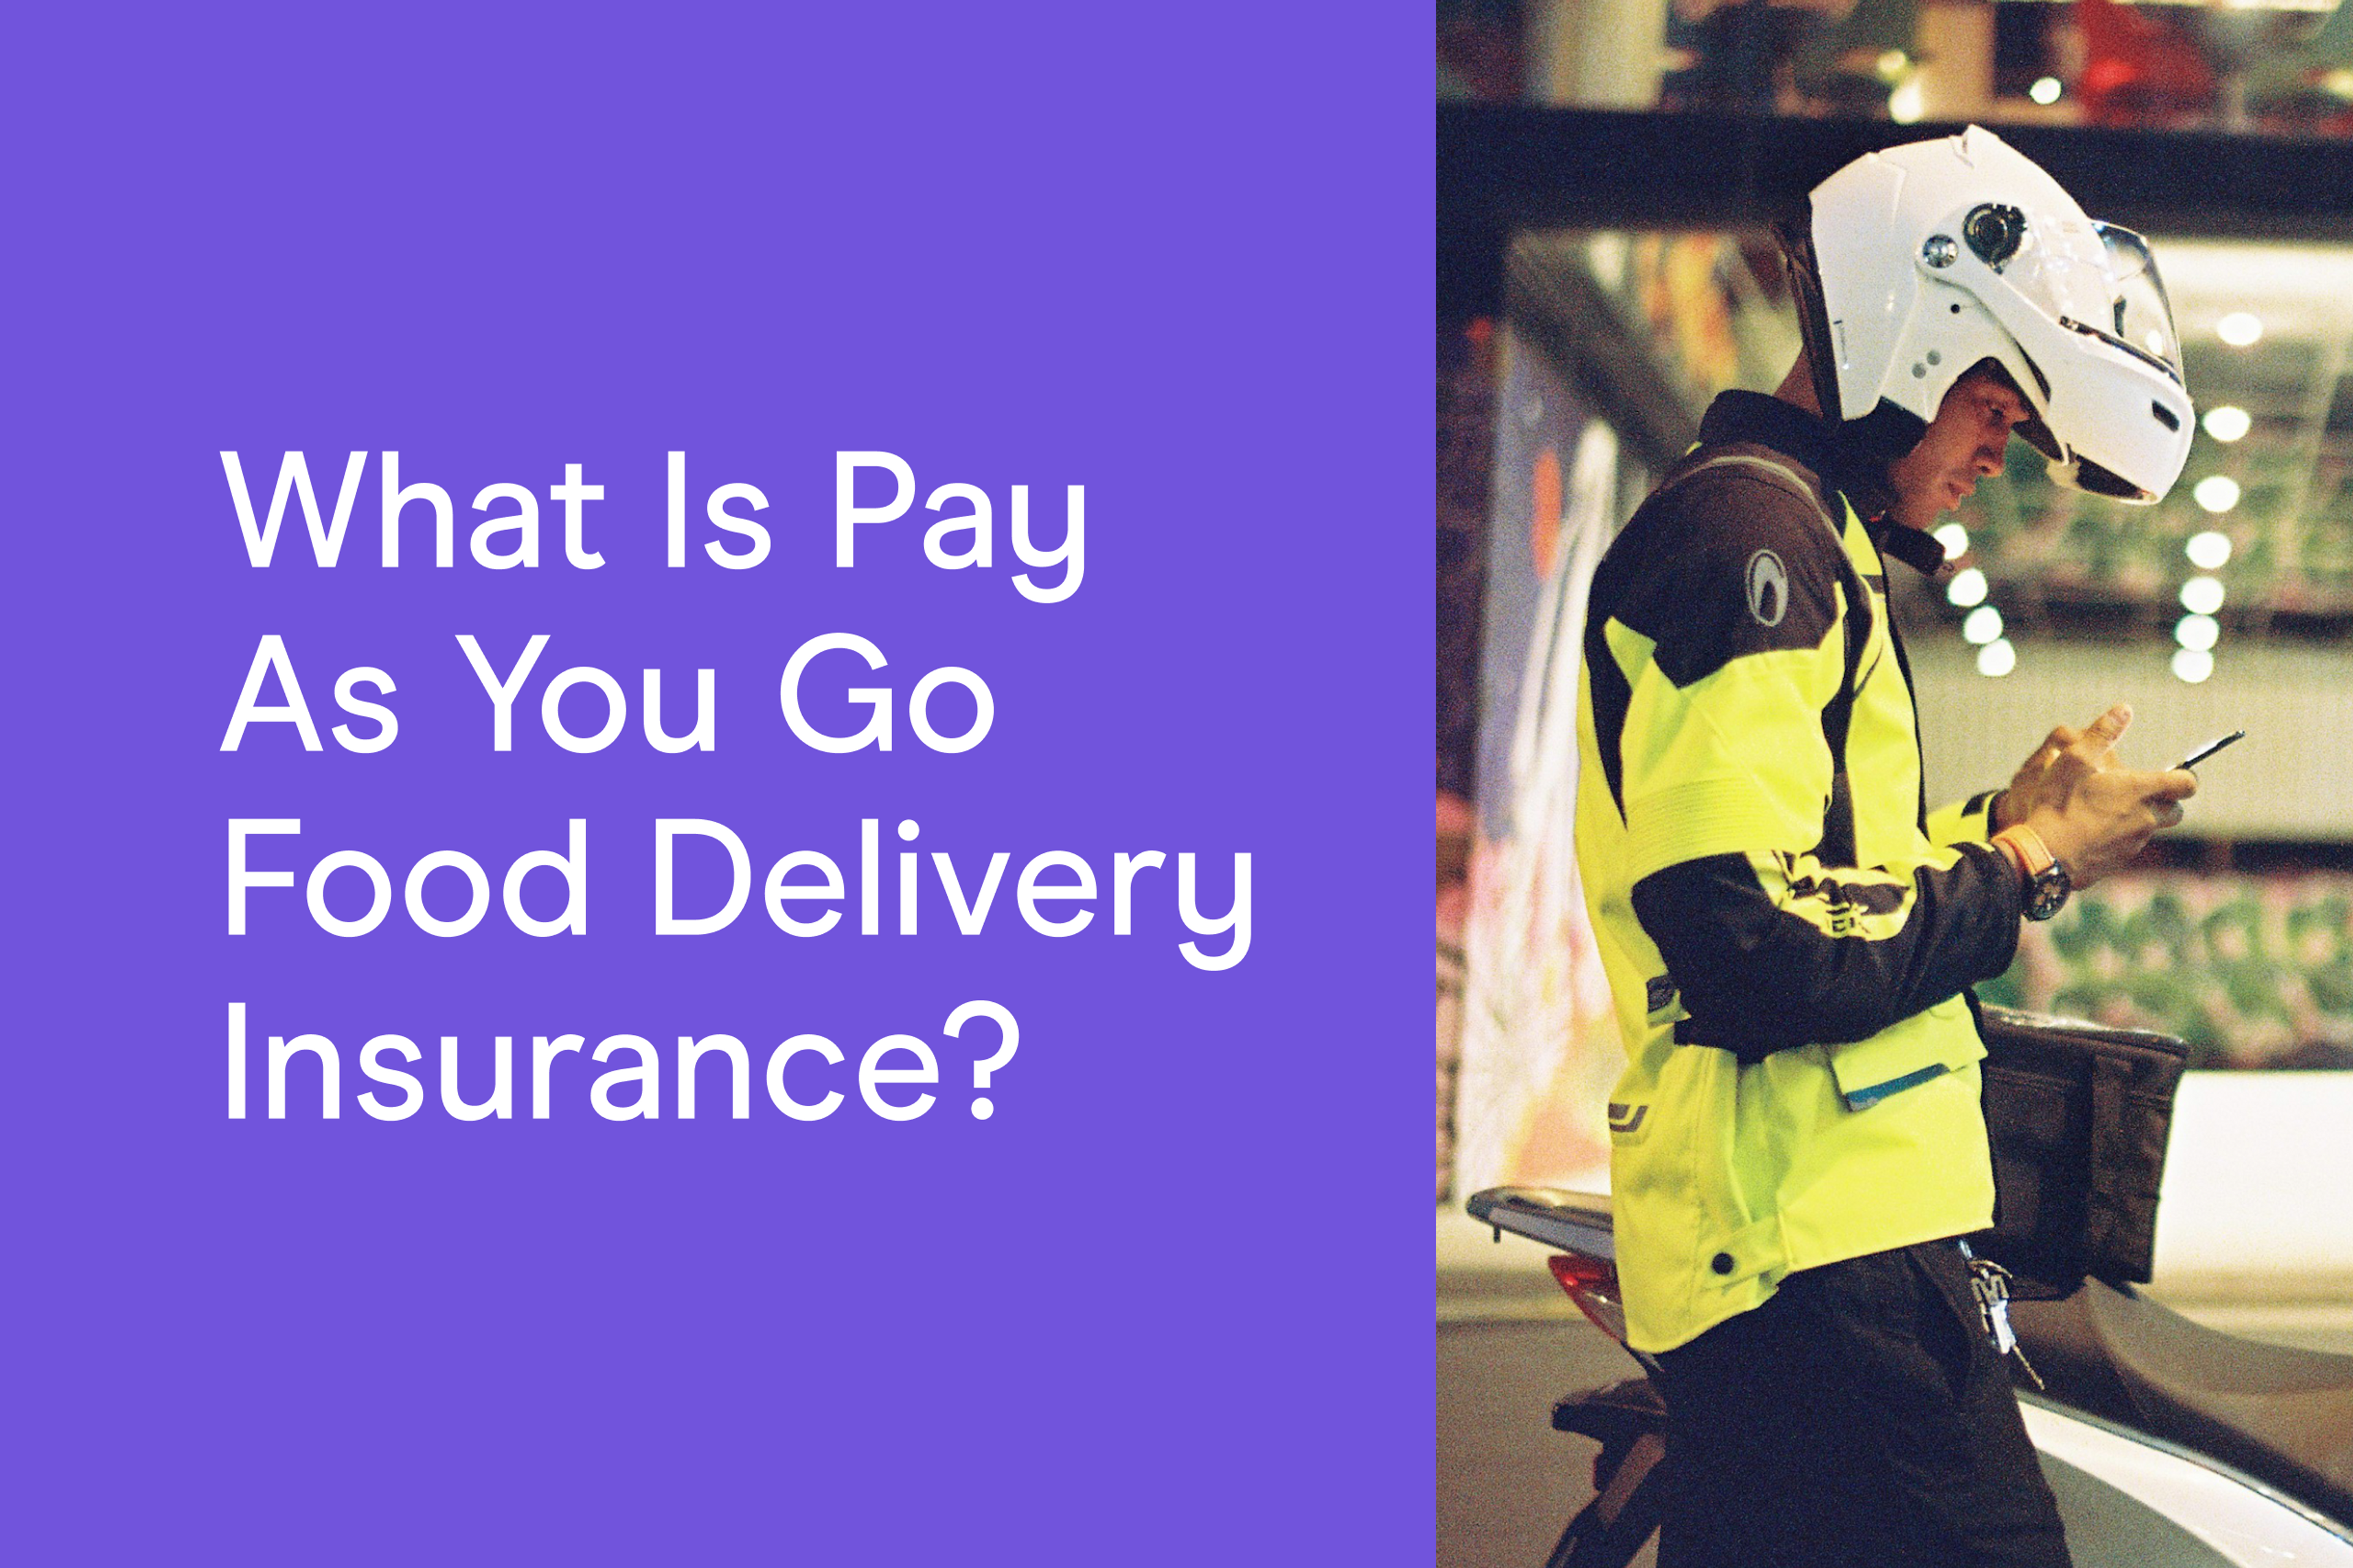 what is pay as you go food delivery insurance?